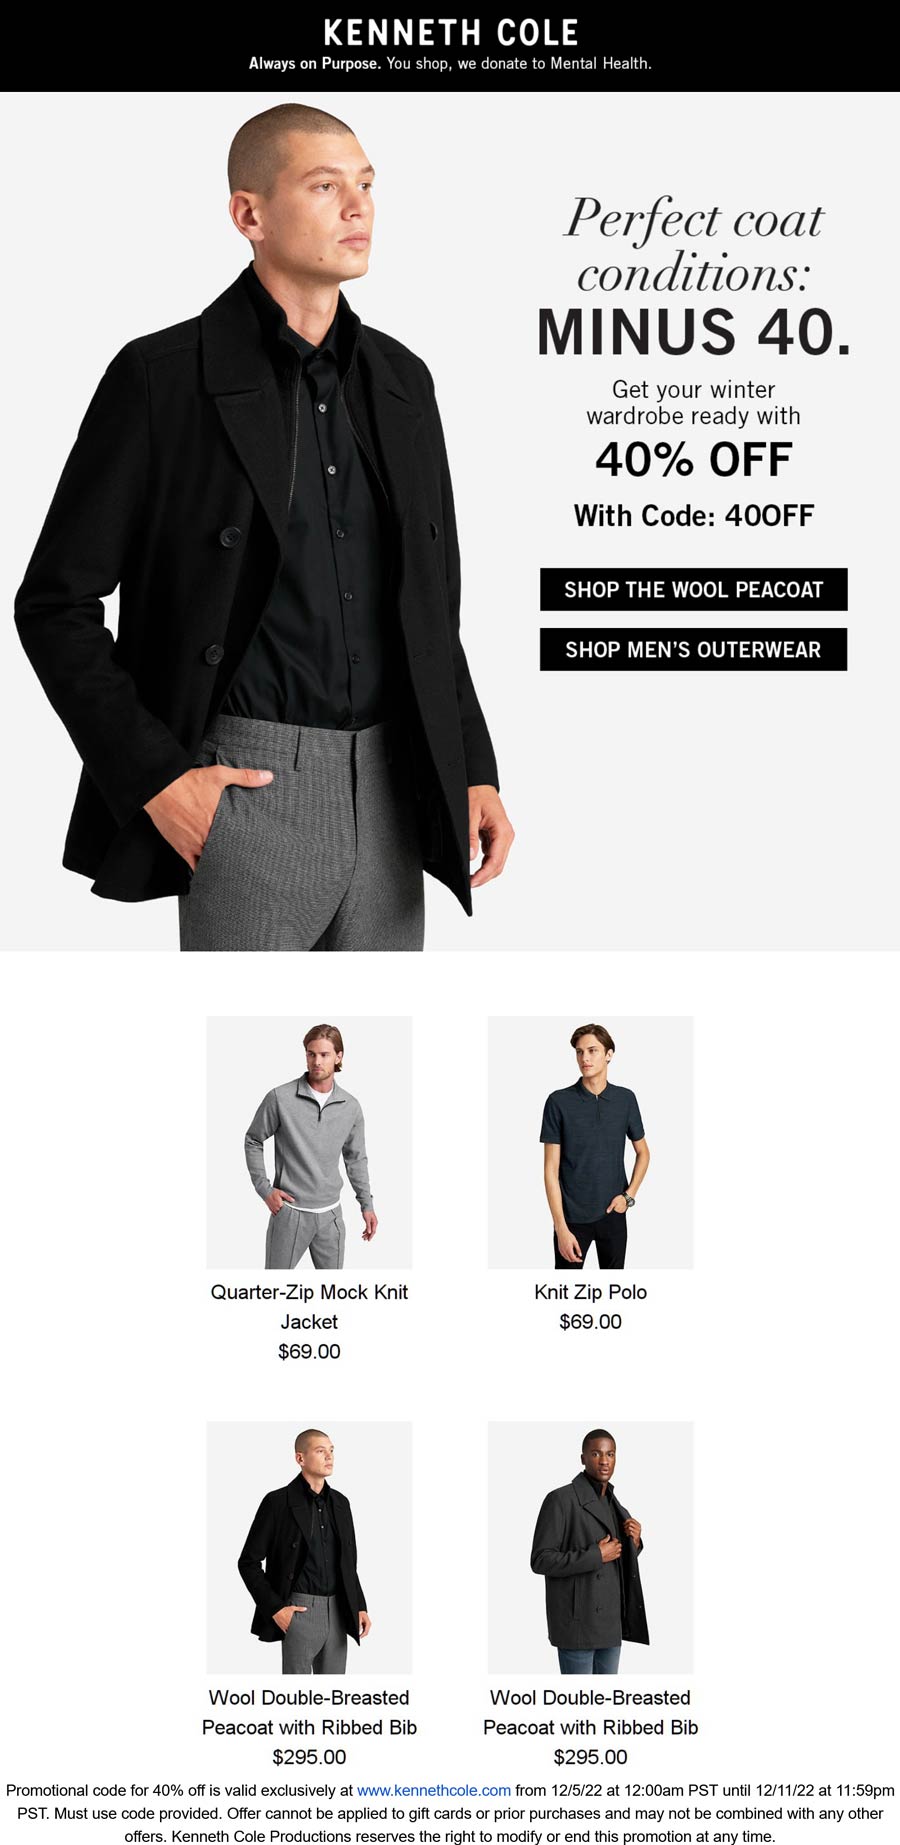 Kenneth Cole coupons & promo code for [January 2023]